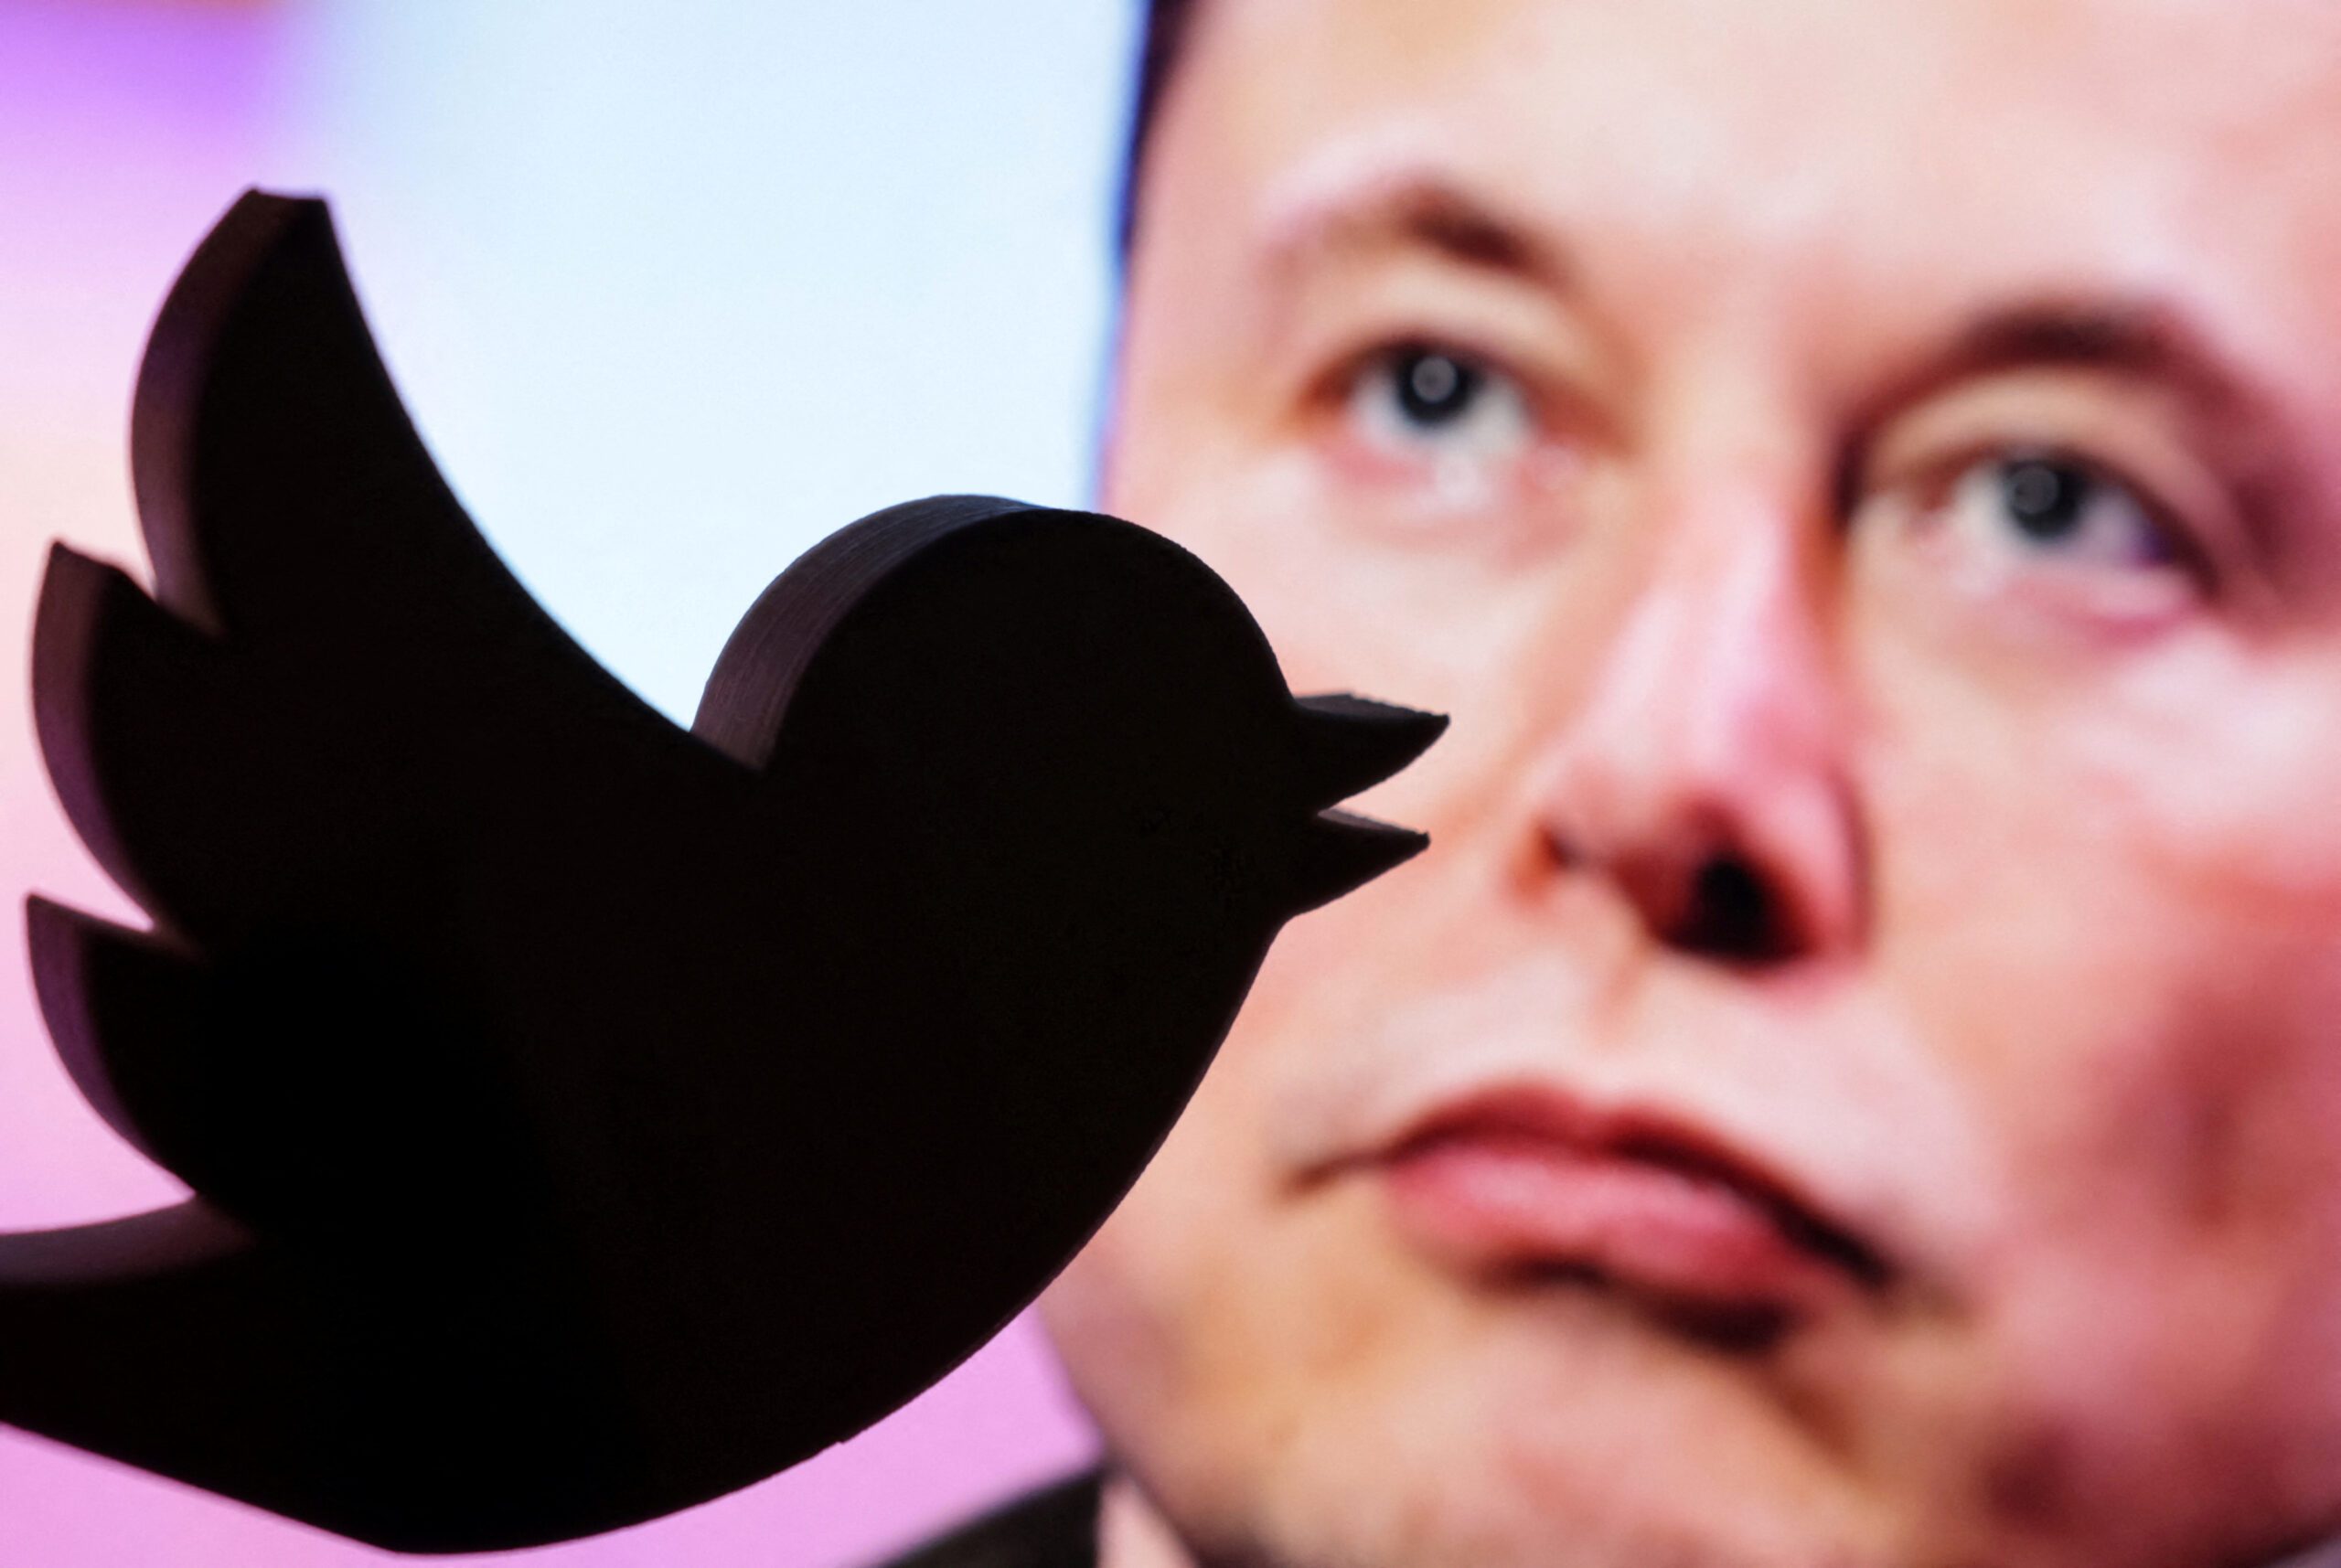 Elon Musk orders removal of Twitter suicide prevention feature, sources say thumbnail